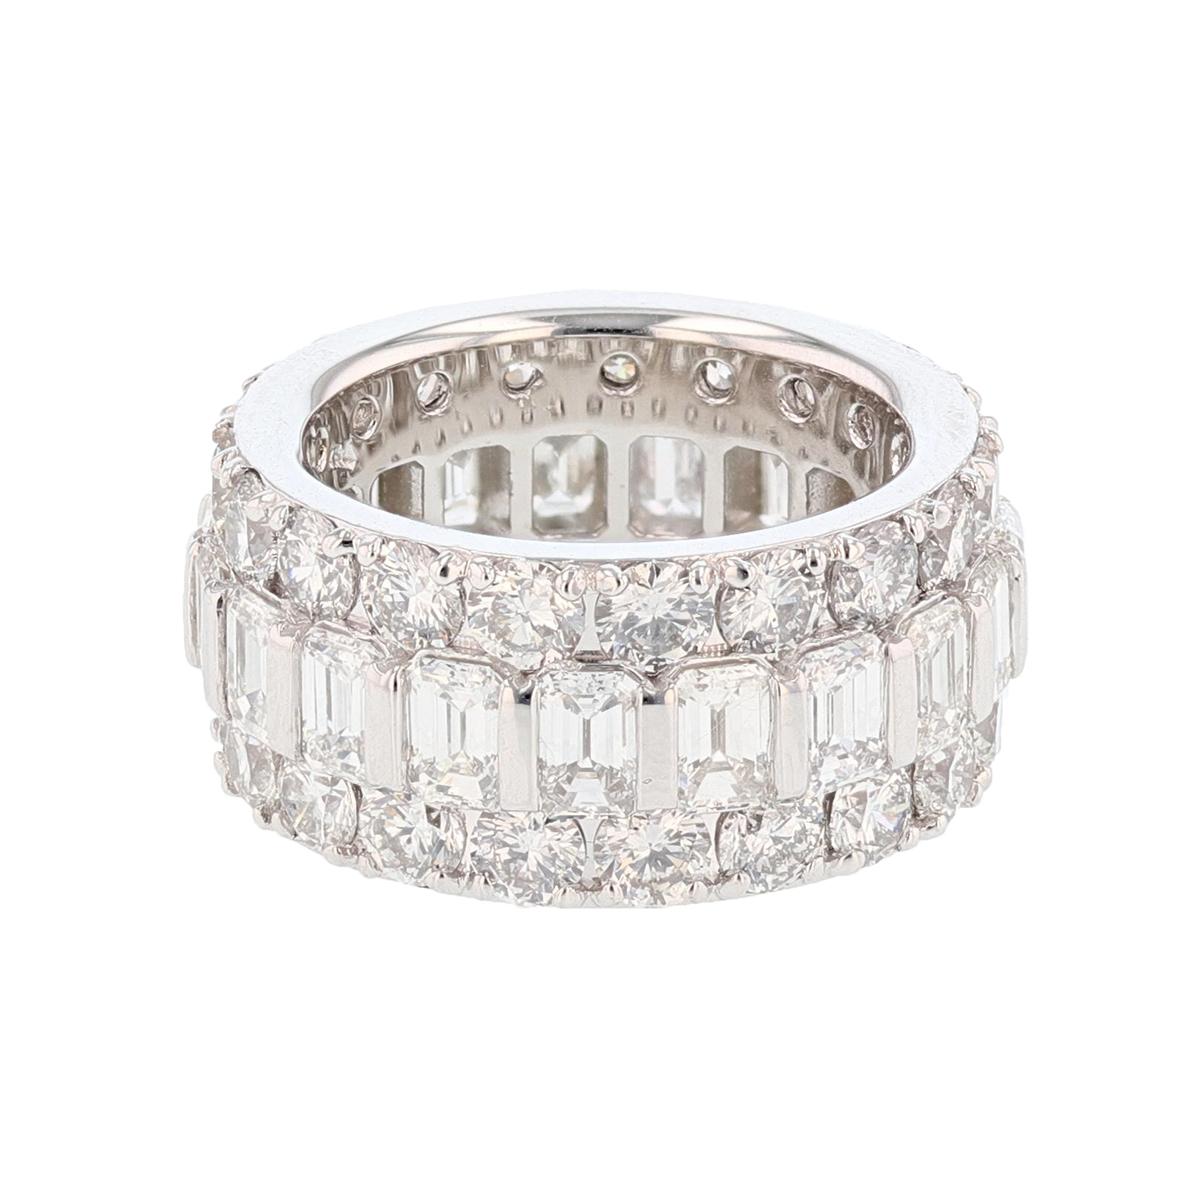 The ring is made in 14K White Gold and features 19 Emerald cut Diamonds, channel set weighing 4.46cts and 38 Round cut Diamonds, prong set weighing 5.08cts with a color grade (H-I) and clarity grade (VS/SI). 